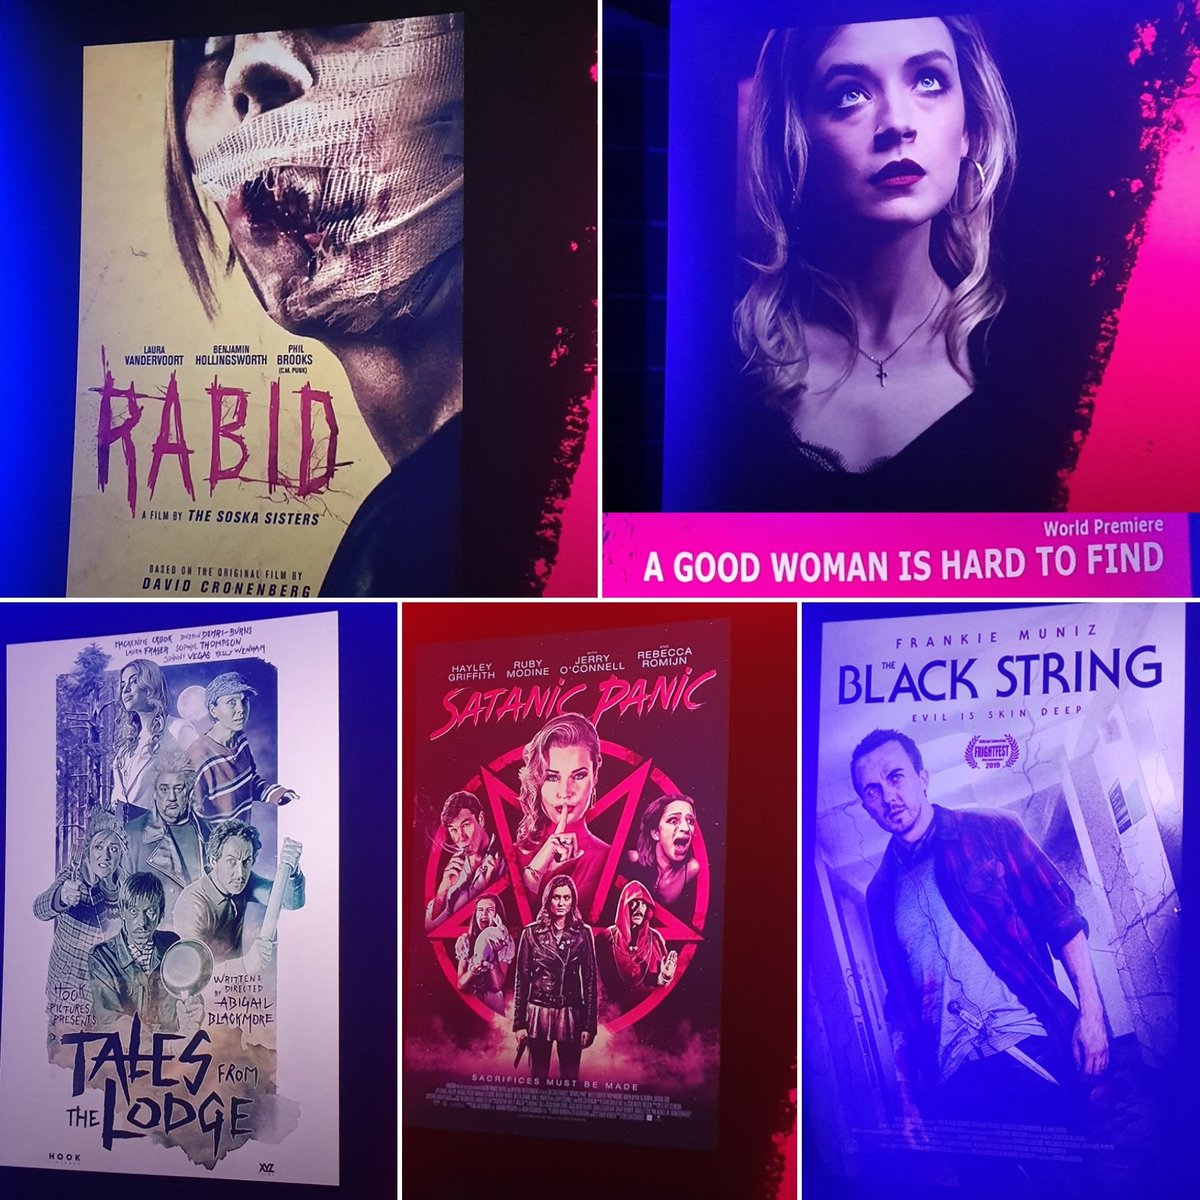 #Frightfest2019 closes strongly with a Monday line-up that again doesn't feature a single dud.
Additionly, both the #WorldPremiere films were huge hits; with the closing film (#AGoodWomanisHardtoFind) a contender for best of the fest...
---
#Rabid #TalesfromtheLodge #SatanicPanic